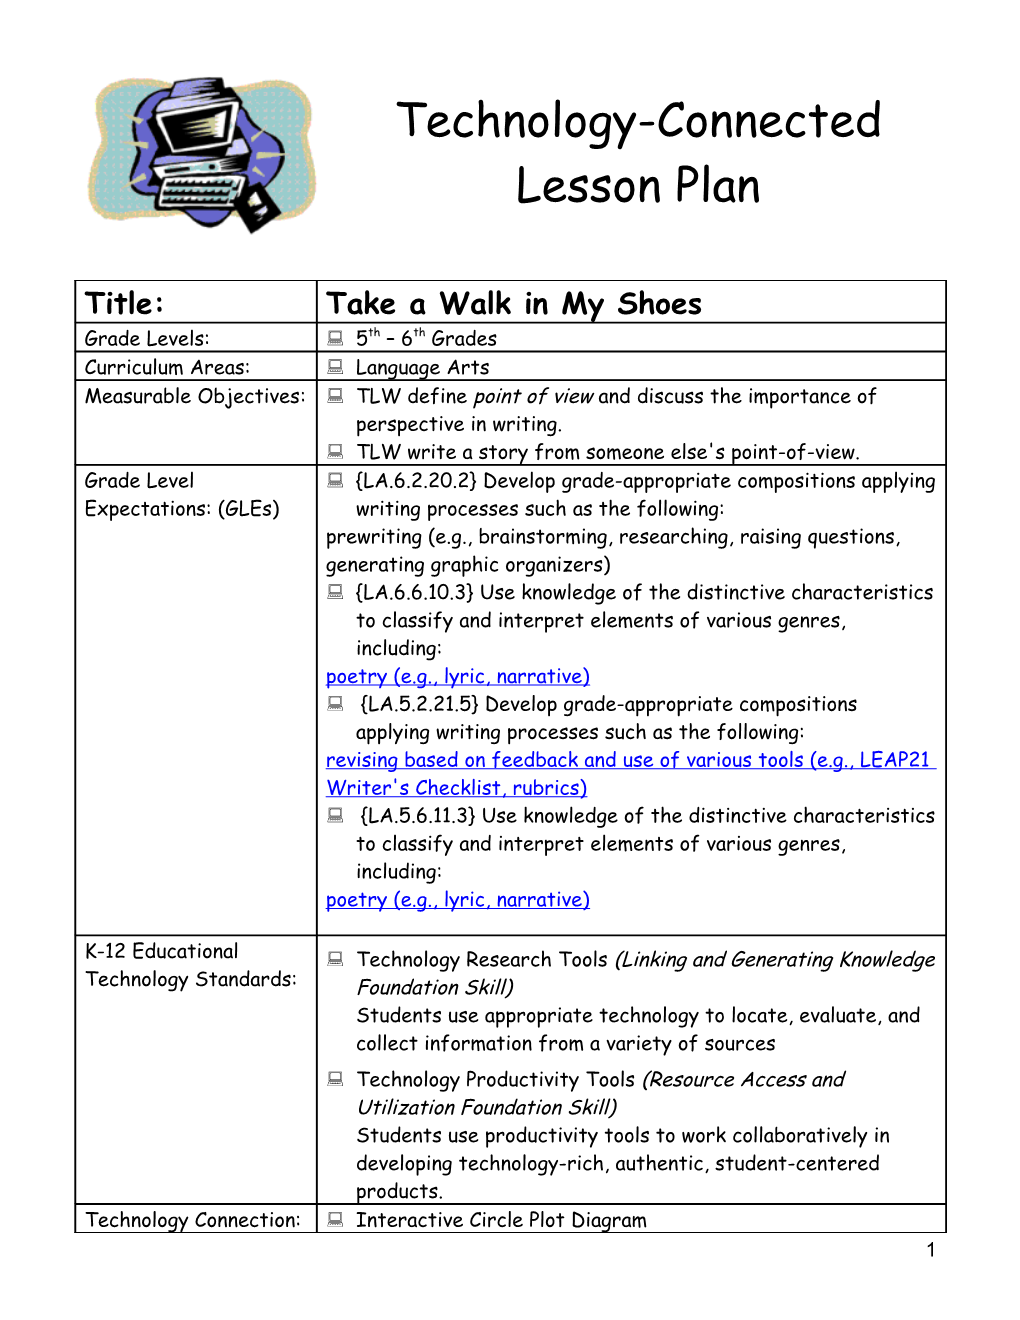 Technology-Connected Lesson Plan s6